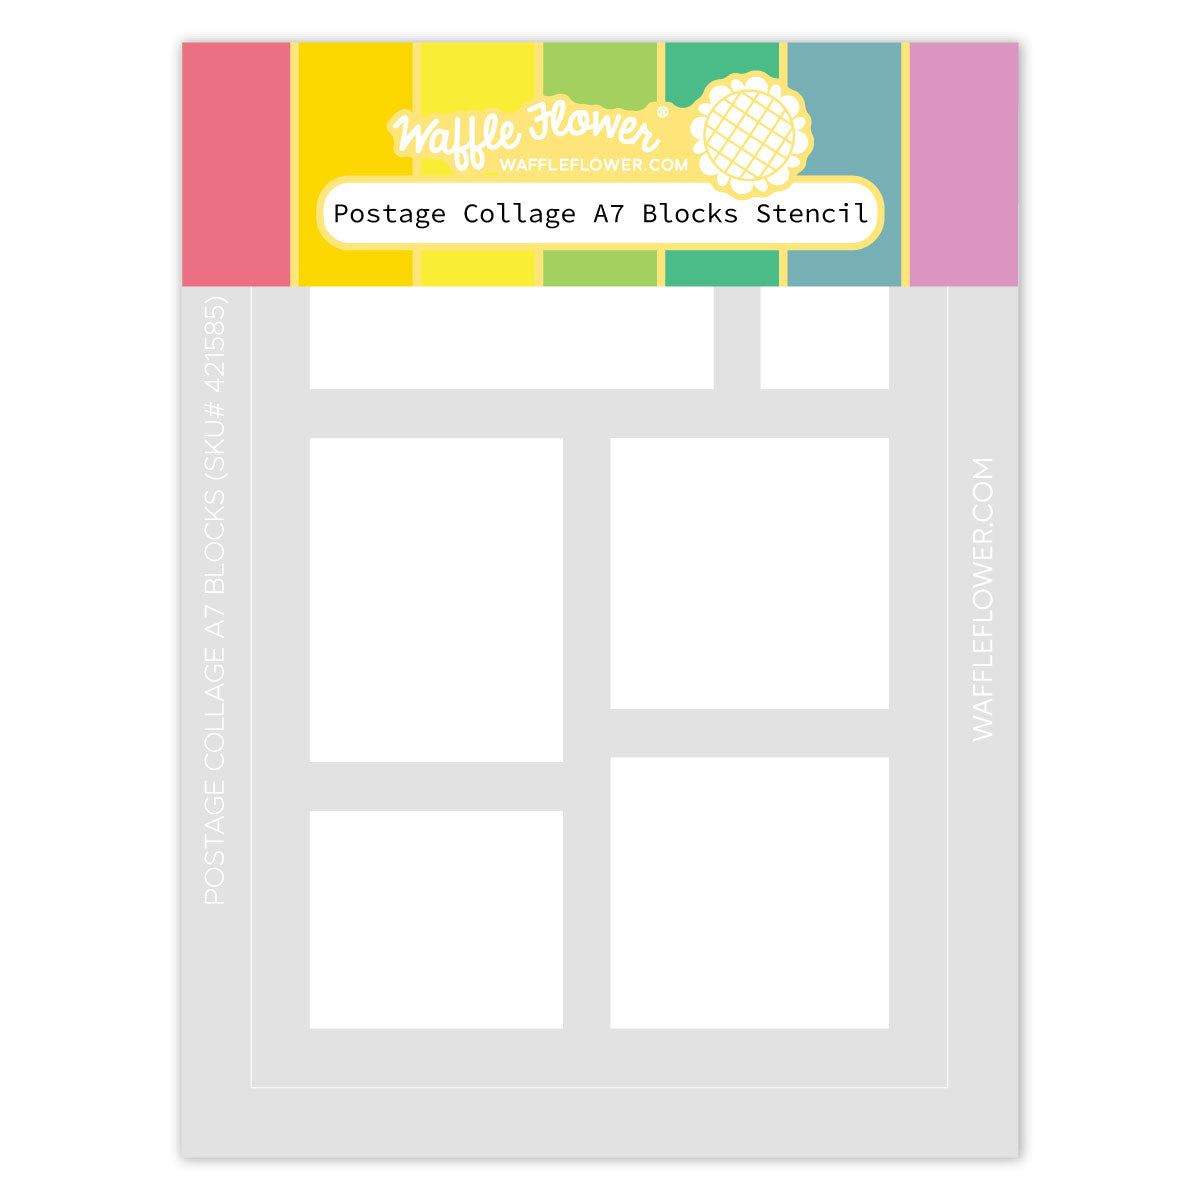 Die Cut Samples - Get 10 for $9 - Free US Delivery